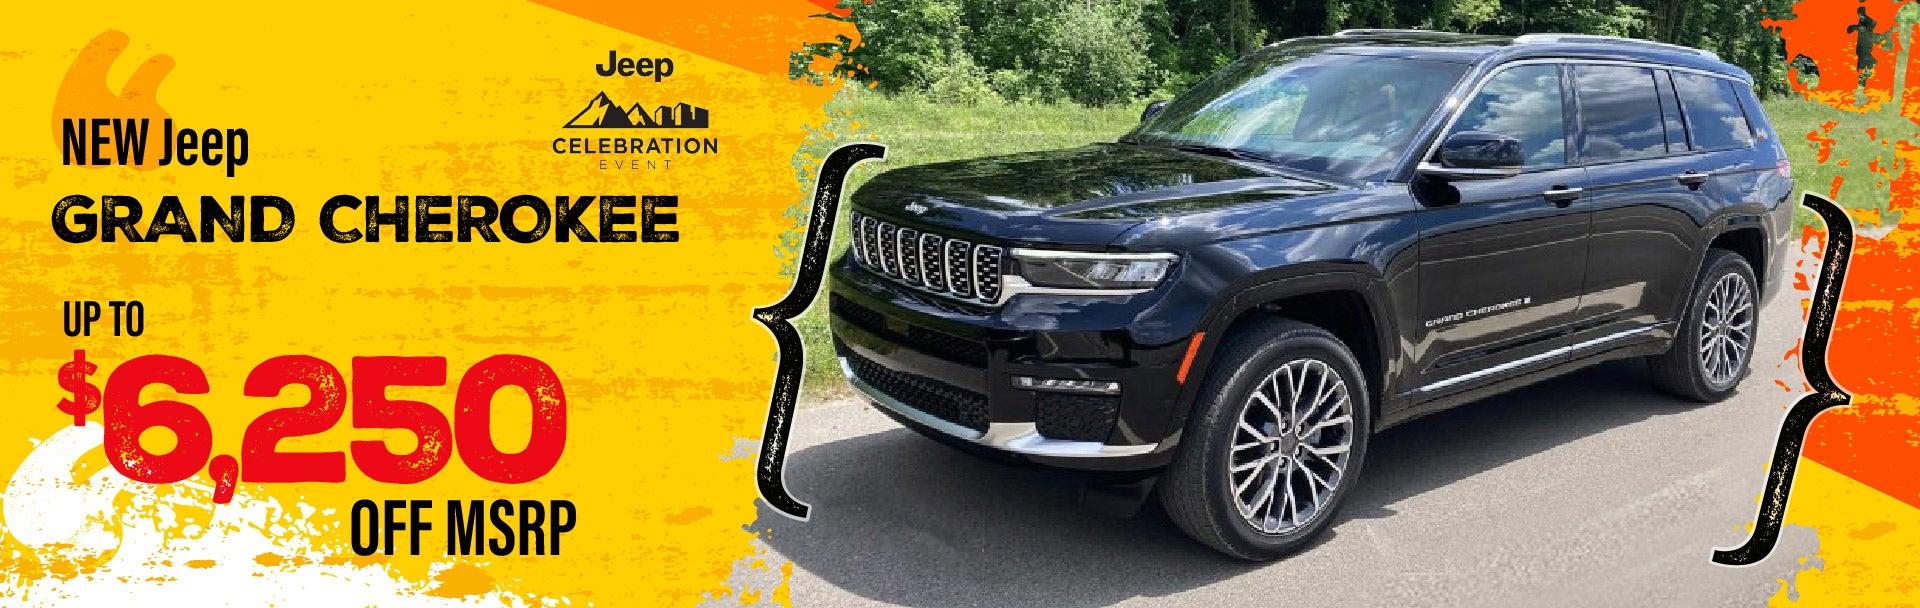 NEW Jeep Grand Cherokee - save up to $6250